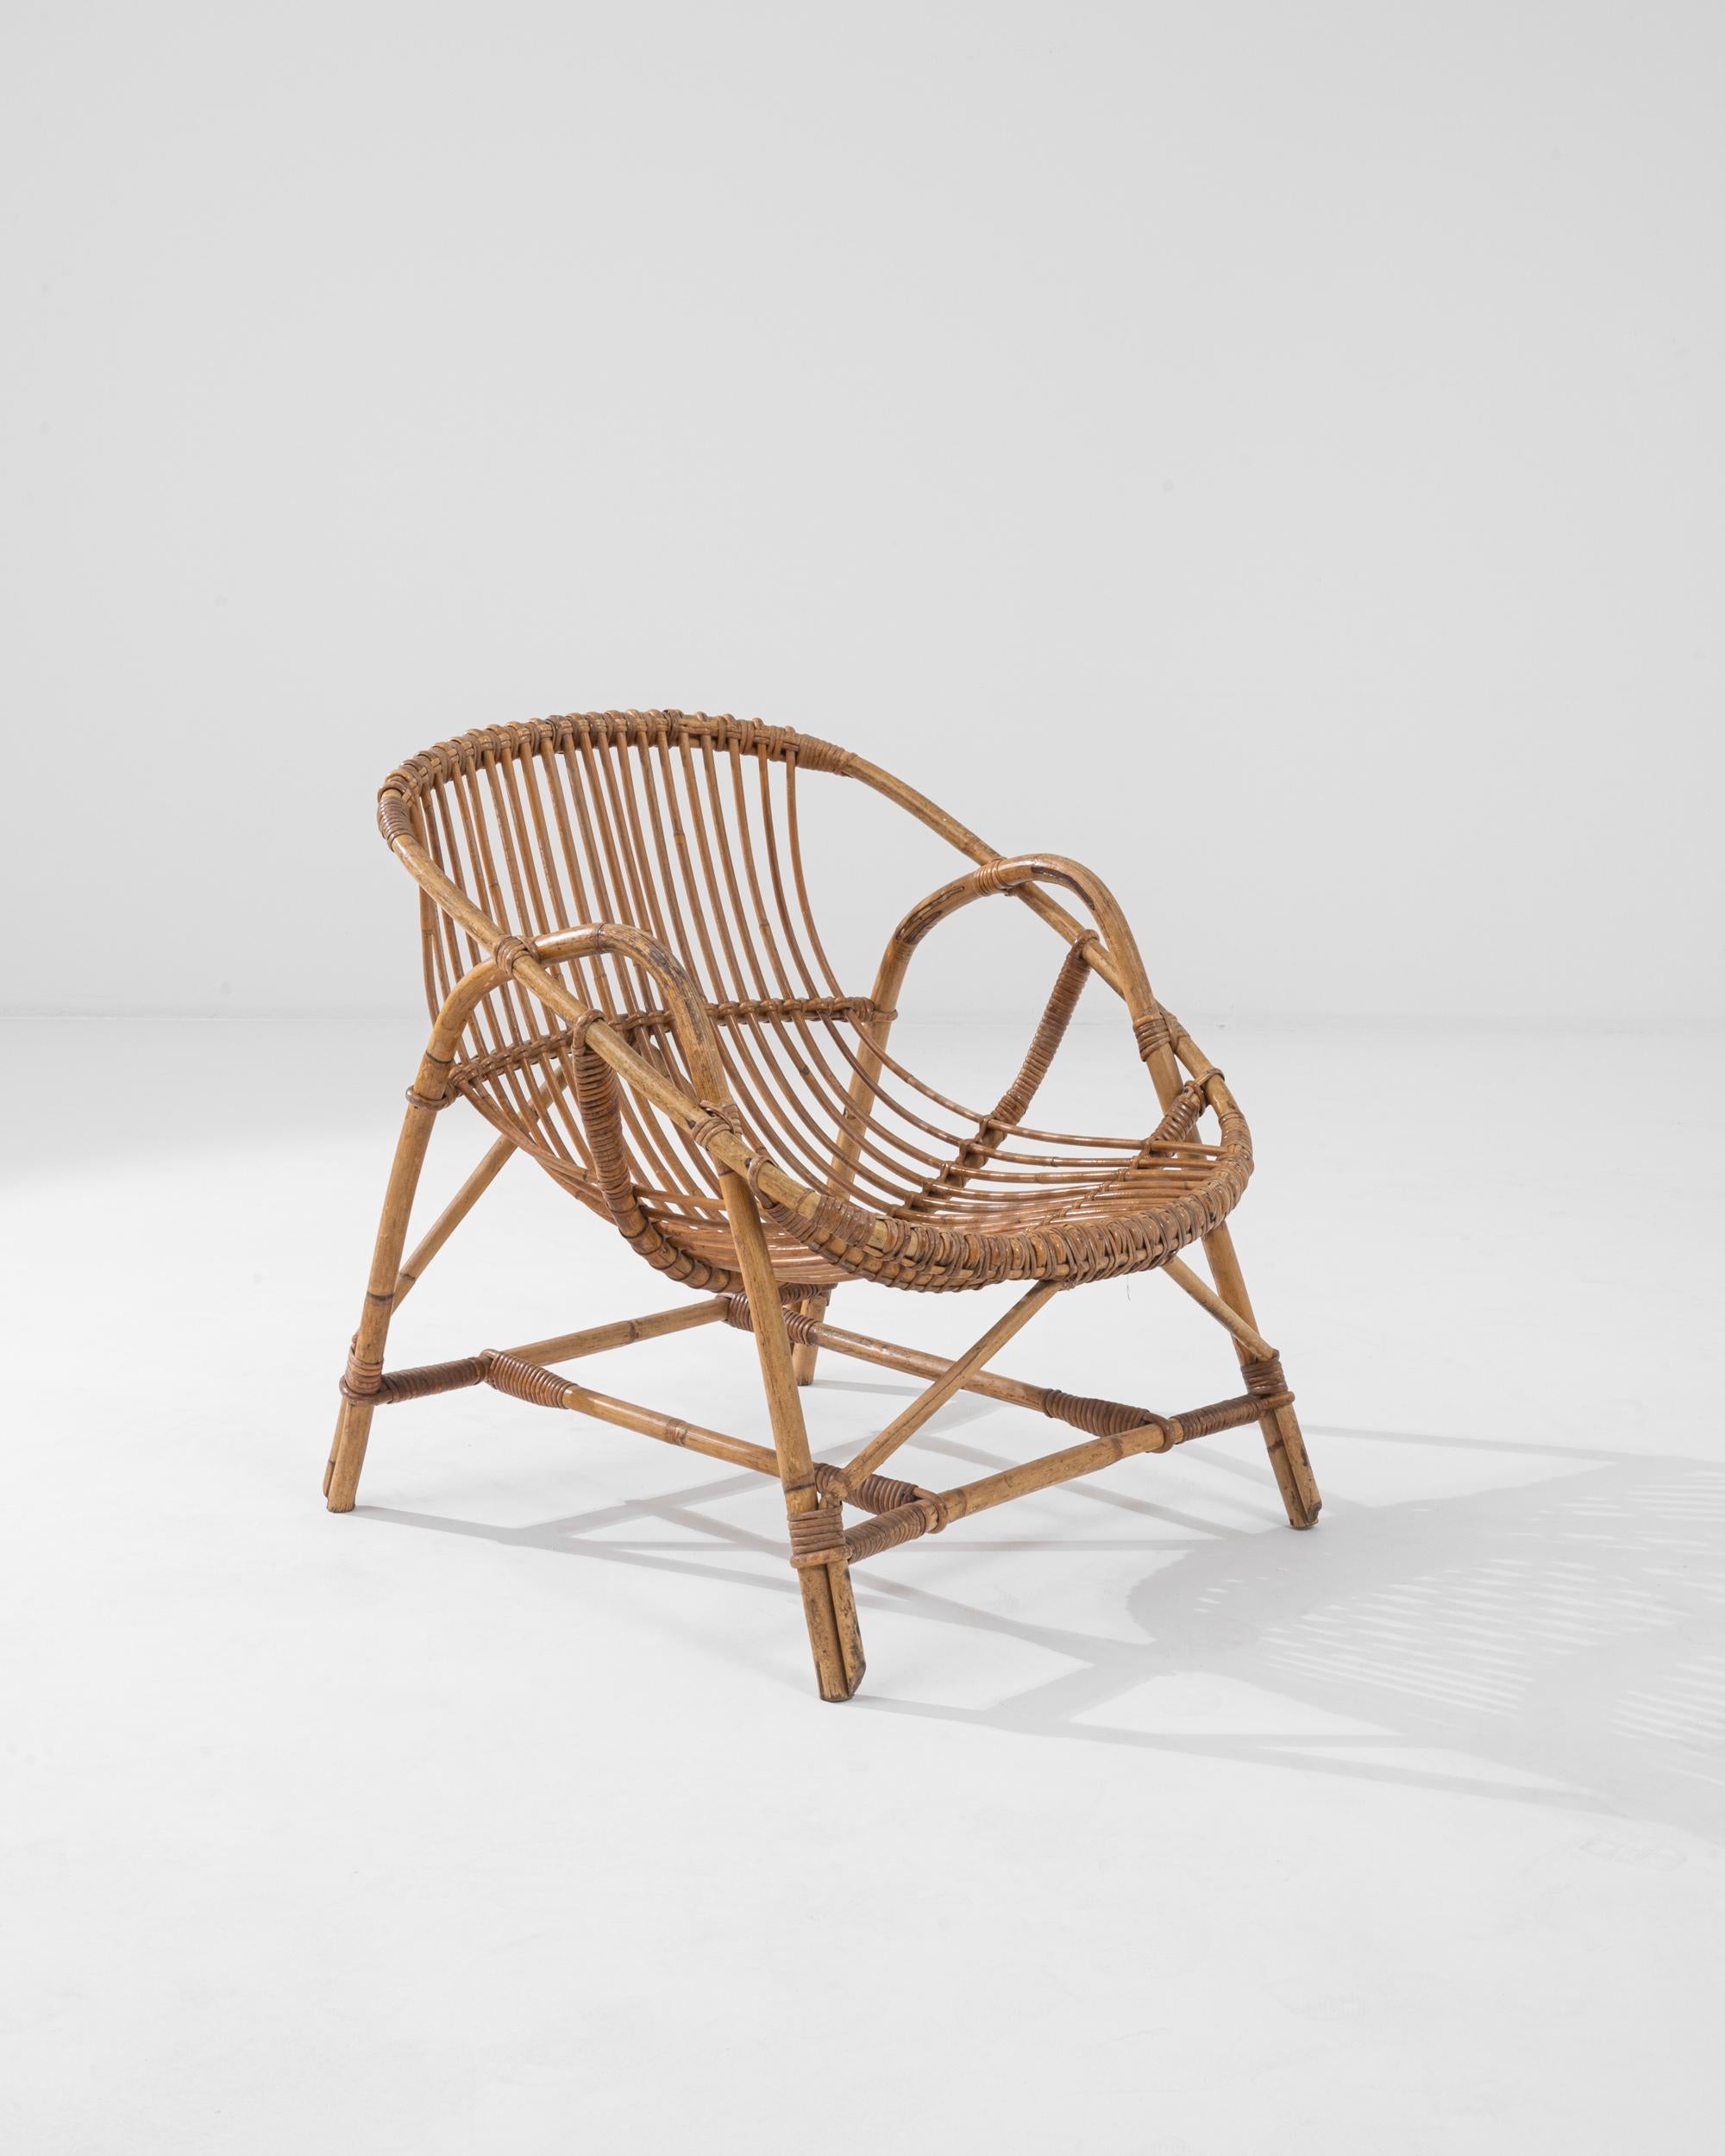 A wooden armchair from France, circa 1960. This french-made armchair is a playful twist on a midcentury classic. Using lashed together rattan, artisans have crafted a chair both geometrically pleasing and surprisingly comfortable. Created by looping